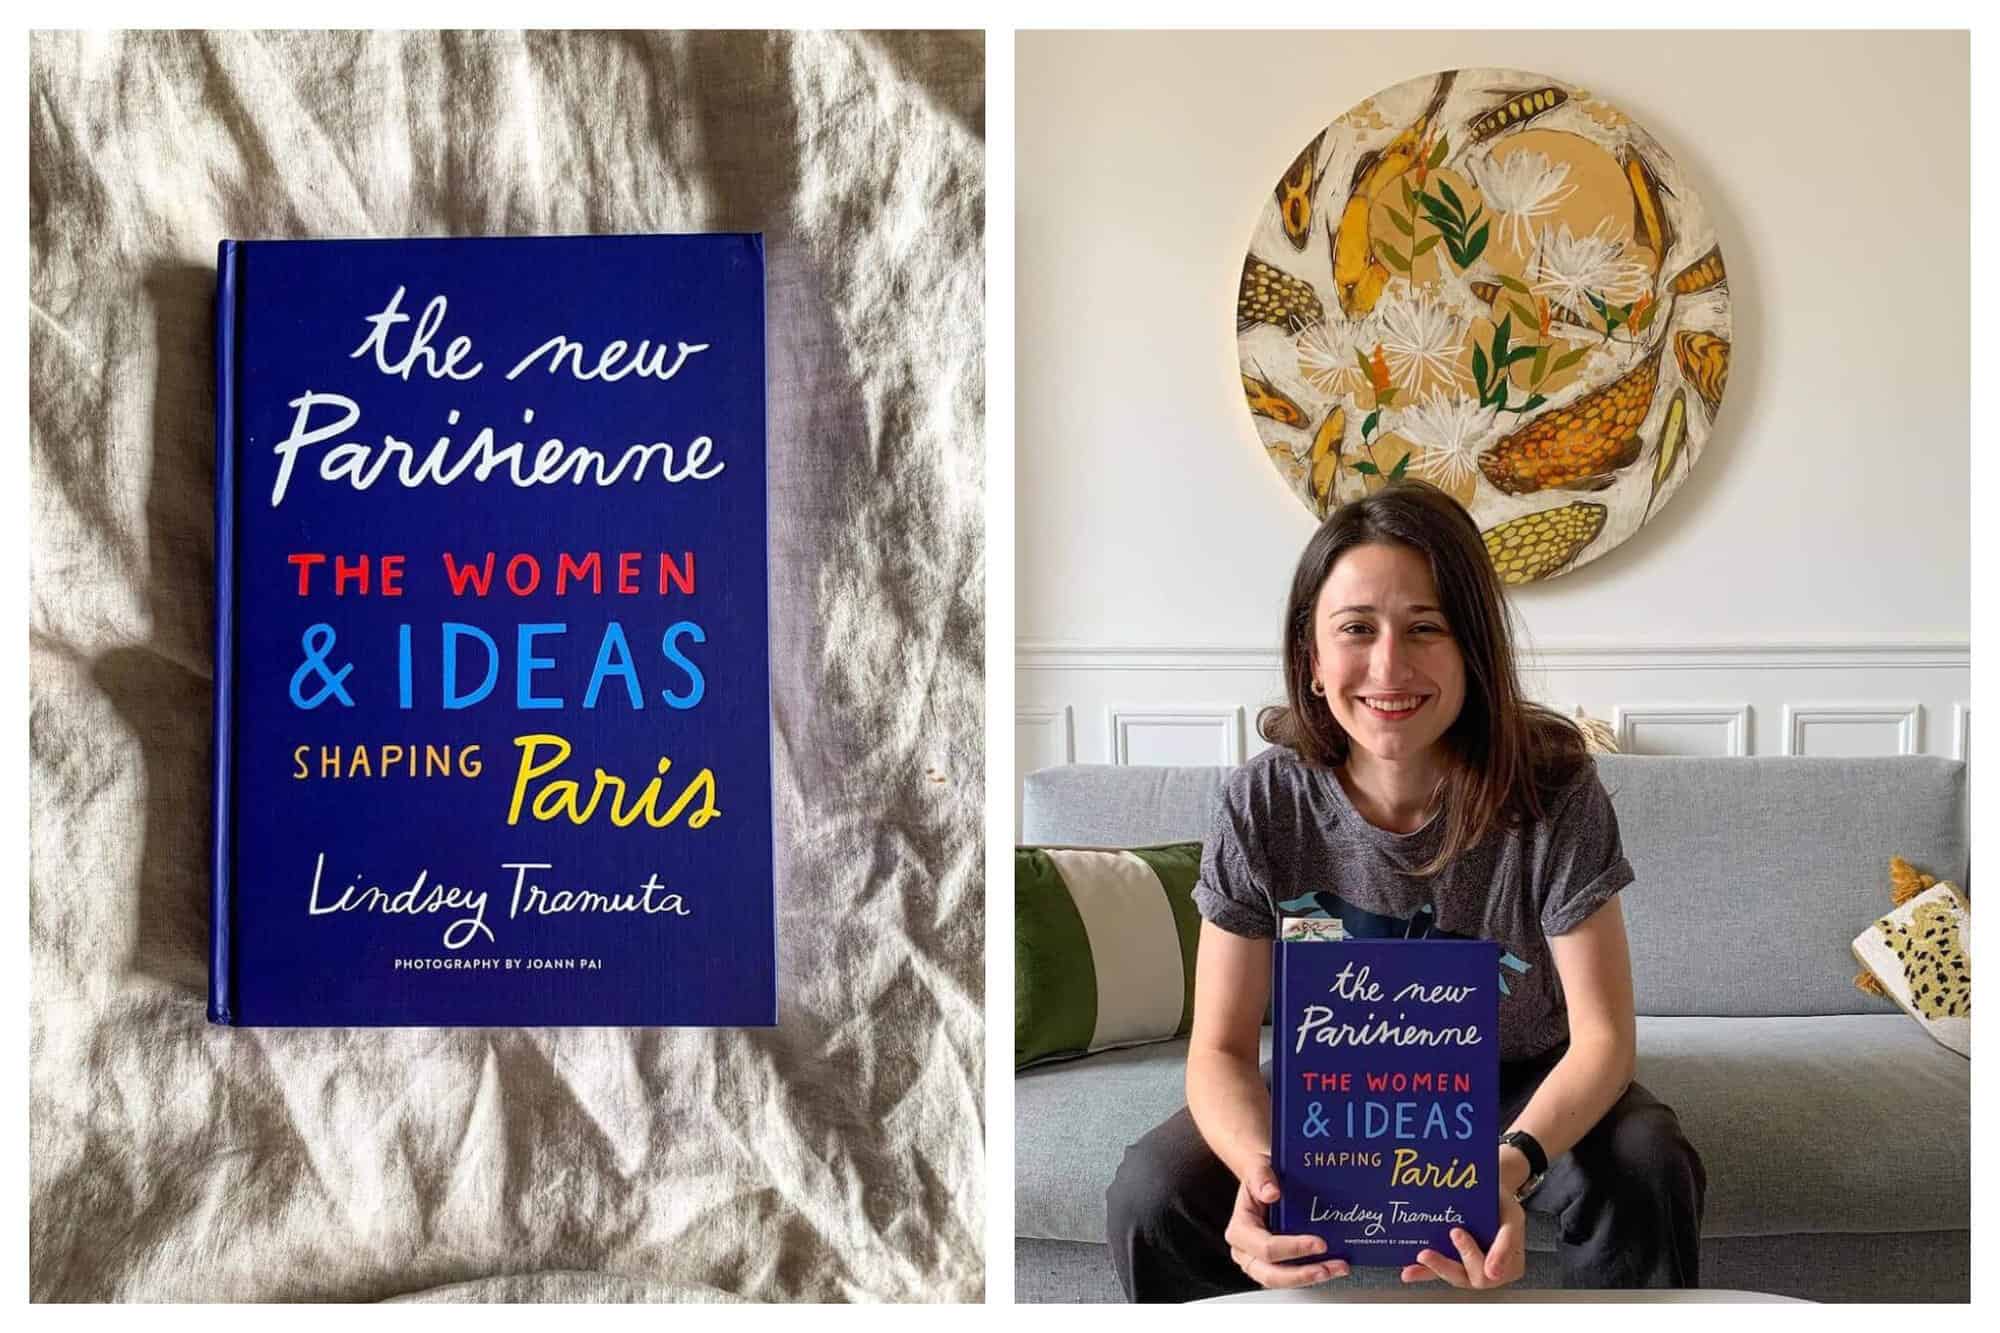 Left: an aerial view of the book "The New Parisienne: The Women & Ideas Shaping Paris" by Lindsey Tramuta. The book is blue and the writing is white, red, blue, and yellow. The book is on a cream linen sheet. Right: Author Lindsey Tramuta holding her book. She has brown hair and is wearing a gray t-shirt with black pants. She is sitting on a gray couch and a green and white pillow is visible to the left. There is a circular painting on the wall covered in orange, yellow, and green koi fish.